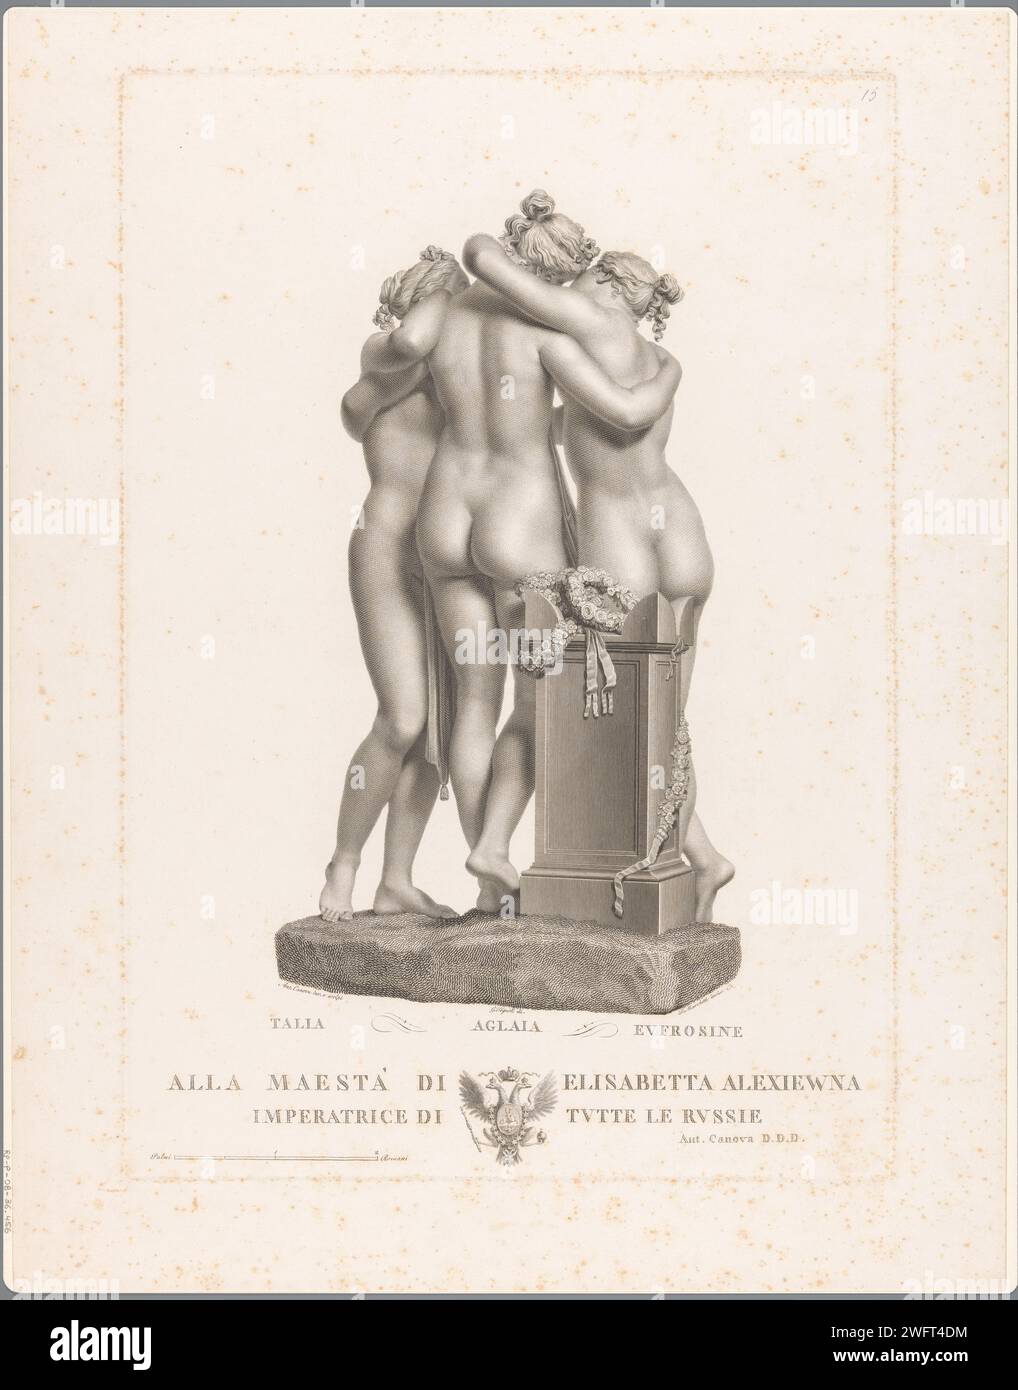 De Drie Gratiën, Domenico Marchetti, After Giovanni Tognolli, After Antonio Canova, 1814 - 1815 print Back view of a sculpture of the three graces (Talia, Aglaia and Eofrosine) by the Italian sculptor Antonio Canova. Assignment under the performance. Italy paper engraving / etching Thalia (one of the Graces). Euphrosyne (one of the Graces). Aglaia (one of the Graces). Graces (Charites), generally three in number; 'Gratie' (Ripa). piece of sculpture, reproduction of a piece of sculpture Stock Photo